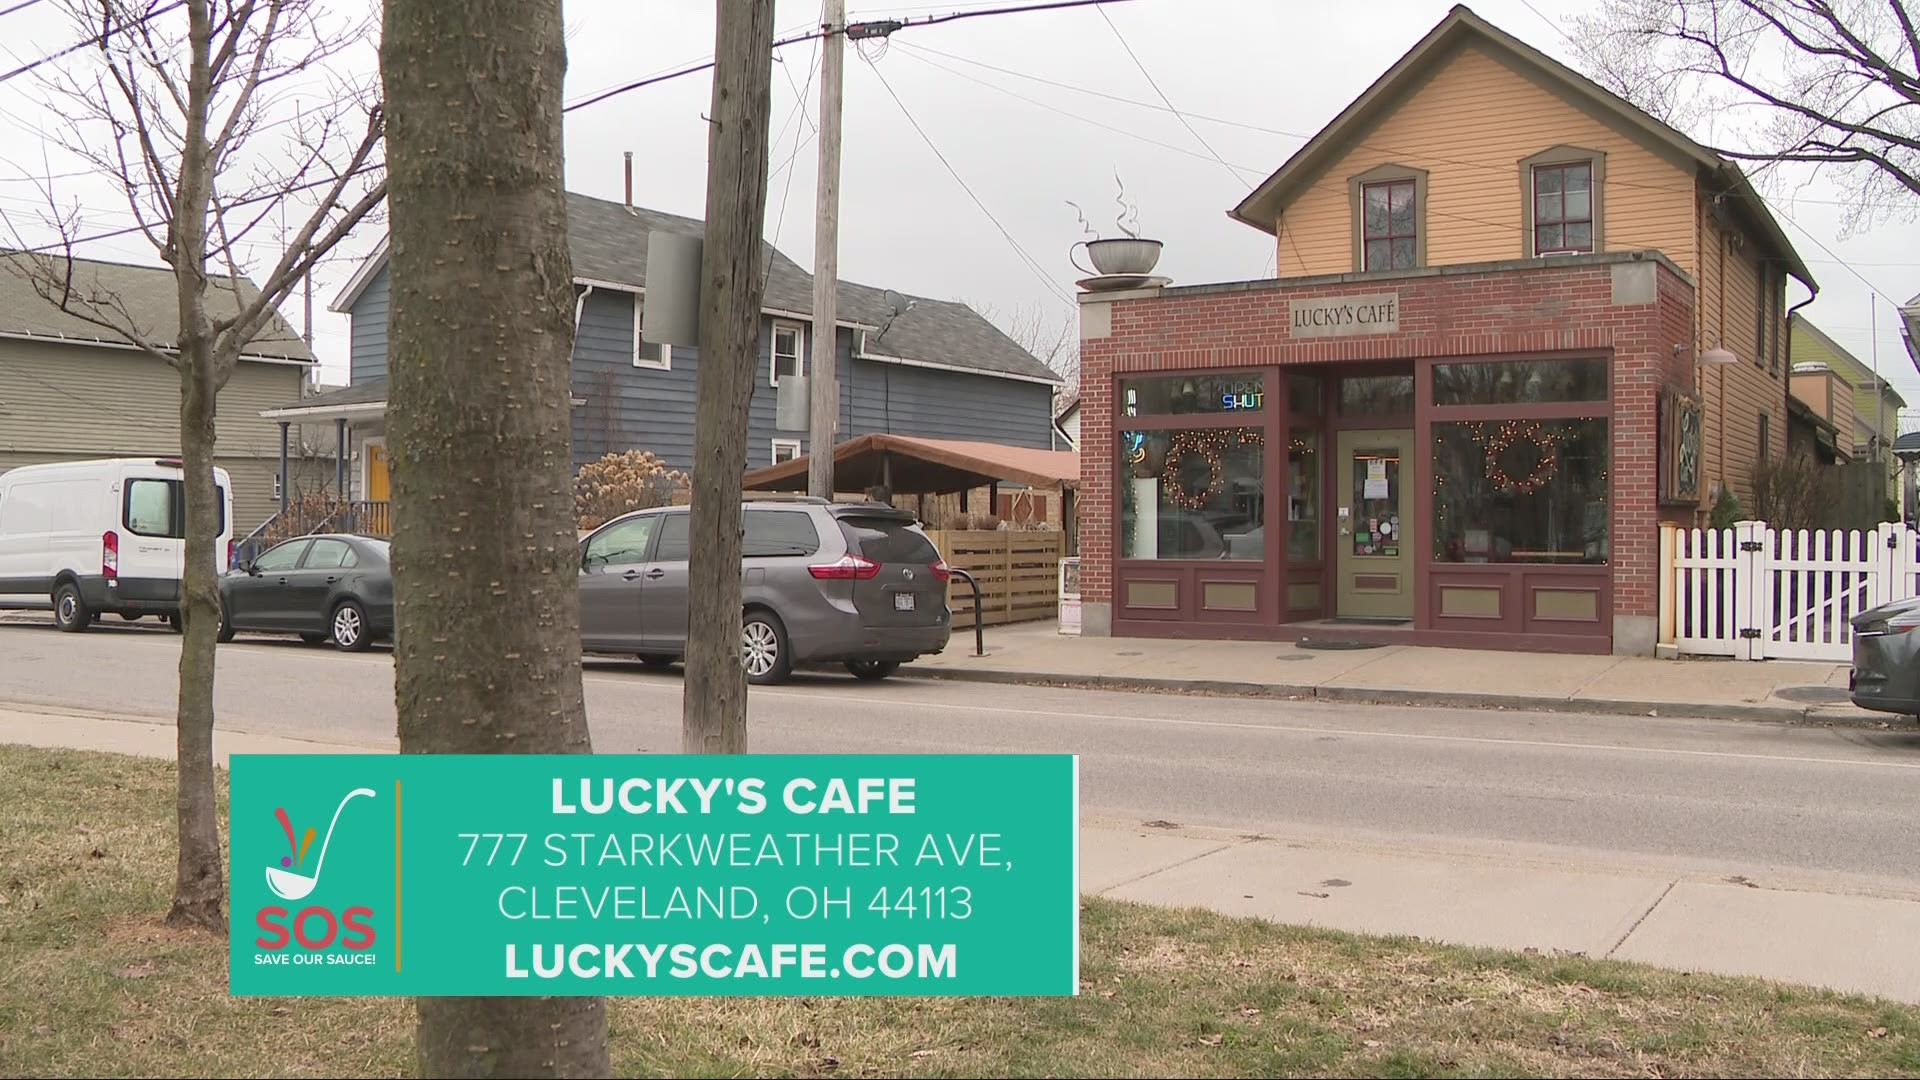 We're shining the spotlight on Lucky's Cafe in Tremont as we continue the 'Save our Sauce' campaign in support of Northeast Ohio restaurants amid the COVID pandemic.